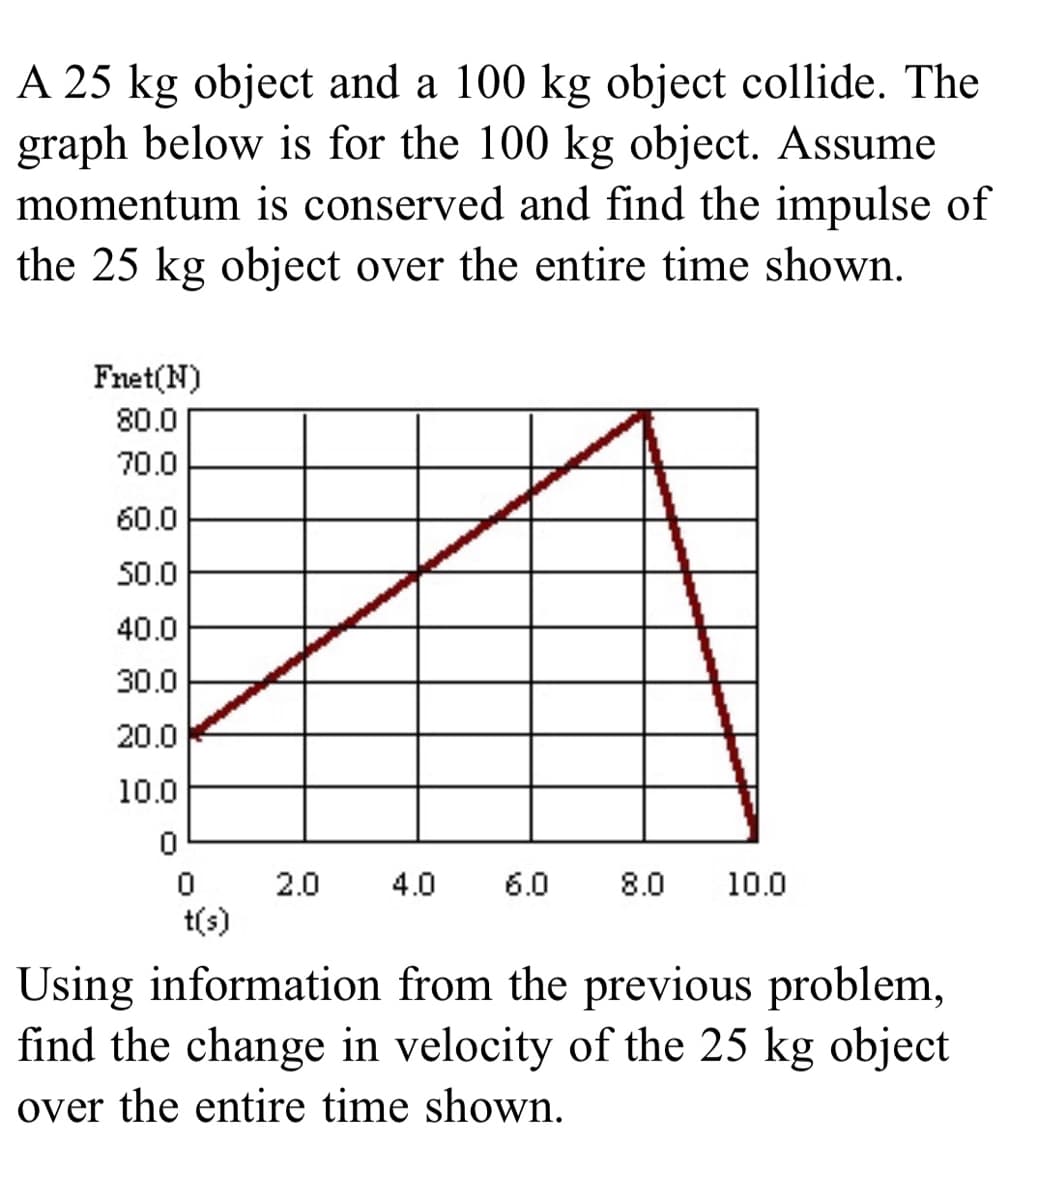 A 25 kg object and a 100 kg object collide. The
graph below is for the 100 kg object. Assume
momentum is conserved and find the impulse of
the 25 kg object over the entire time shown.
Fnet(N)
80.0
70.0
60.0
50.0
40.0
30.0
20.0
10.0
2.0
4.0
6.0
8.0
10.0
t(s)
Using information from the previous problem,
find the change in velocity of the 25 kg object
over the entire time shown.
